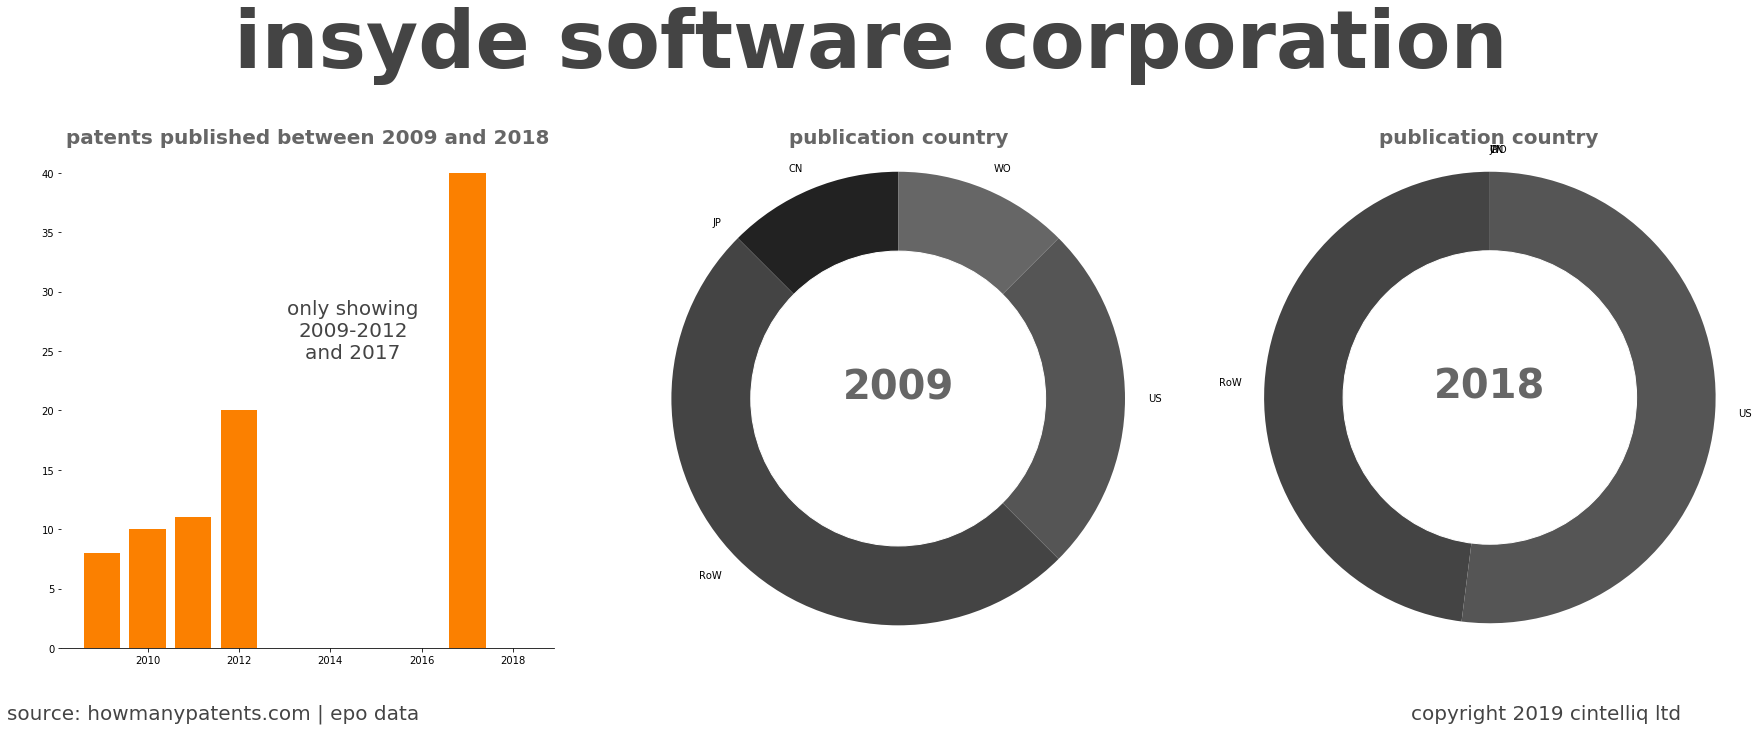 summary of patents for Insyde Software Corporation